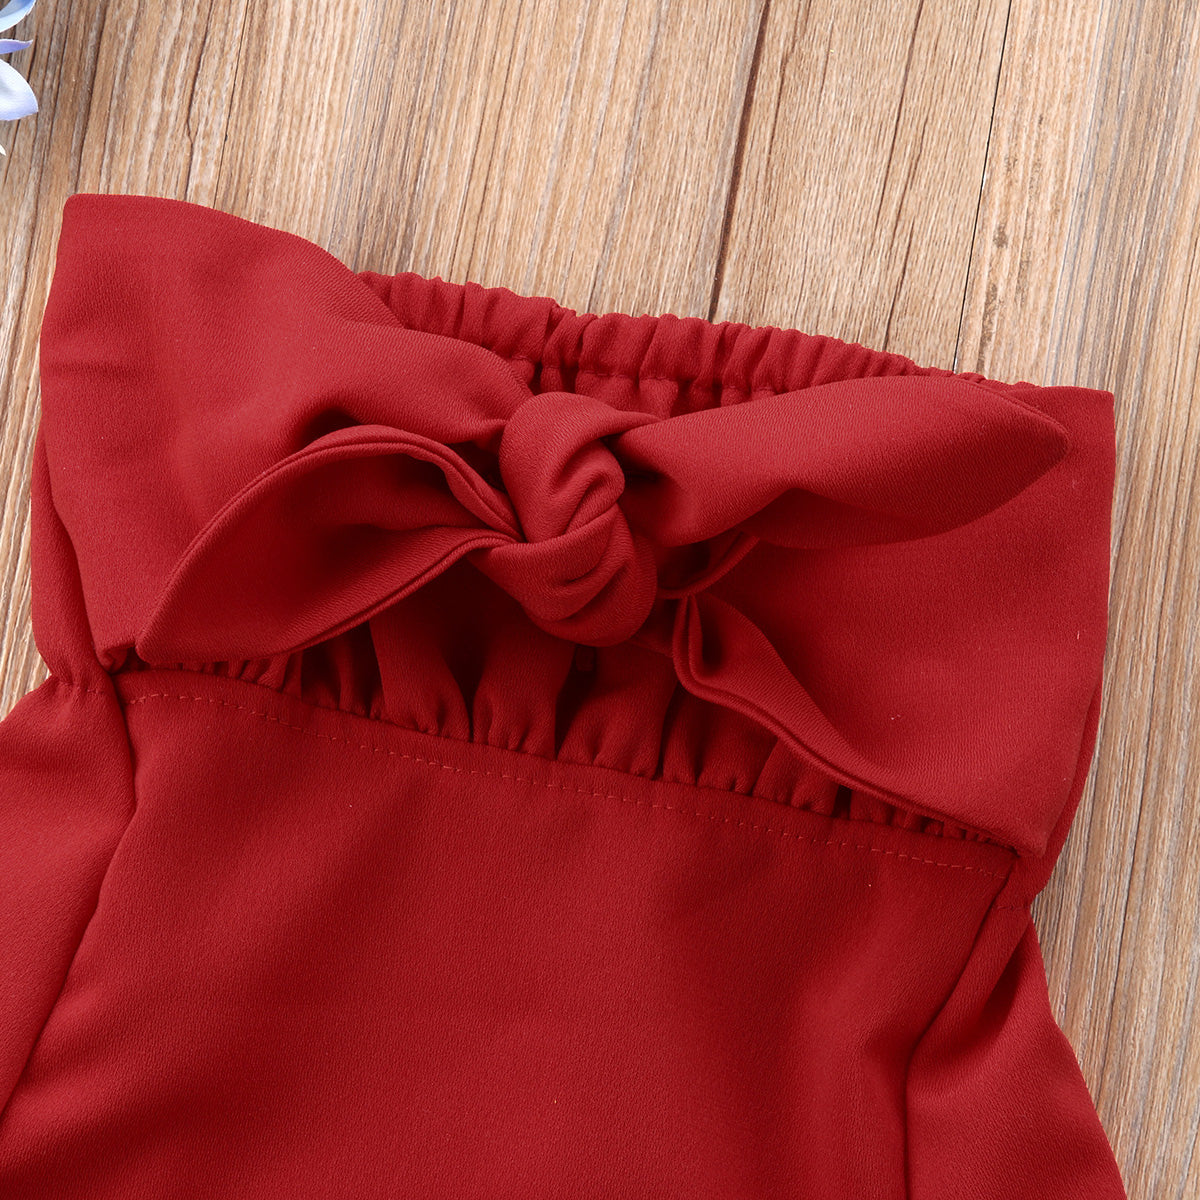 Girl Baby Girl Red Bow Knot Jumpsuit